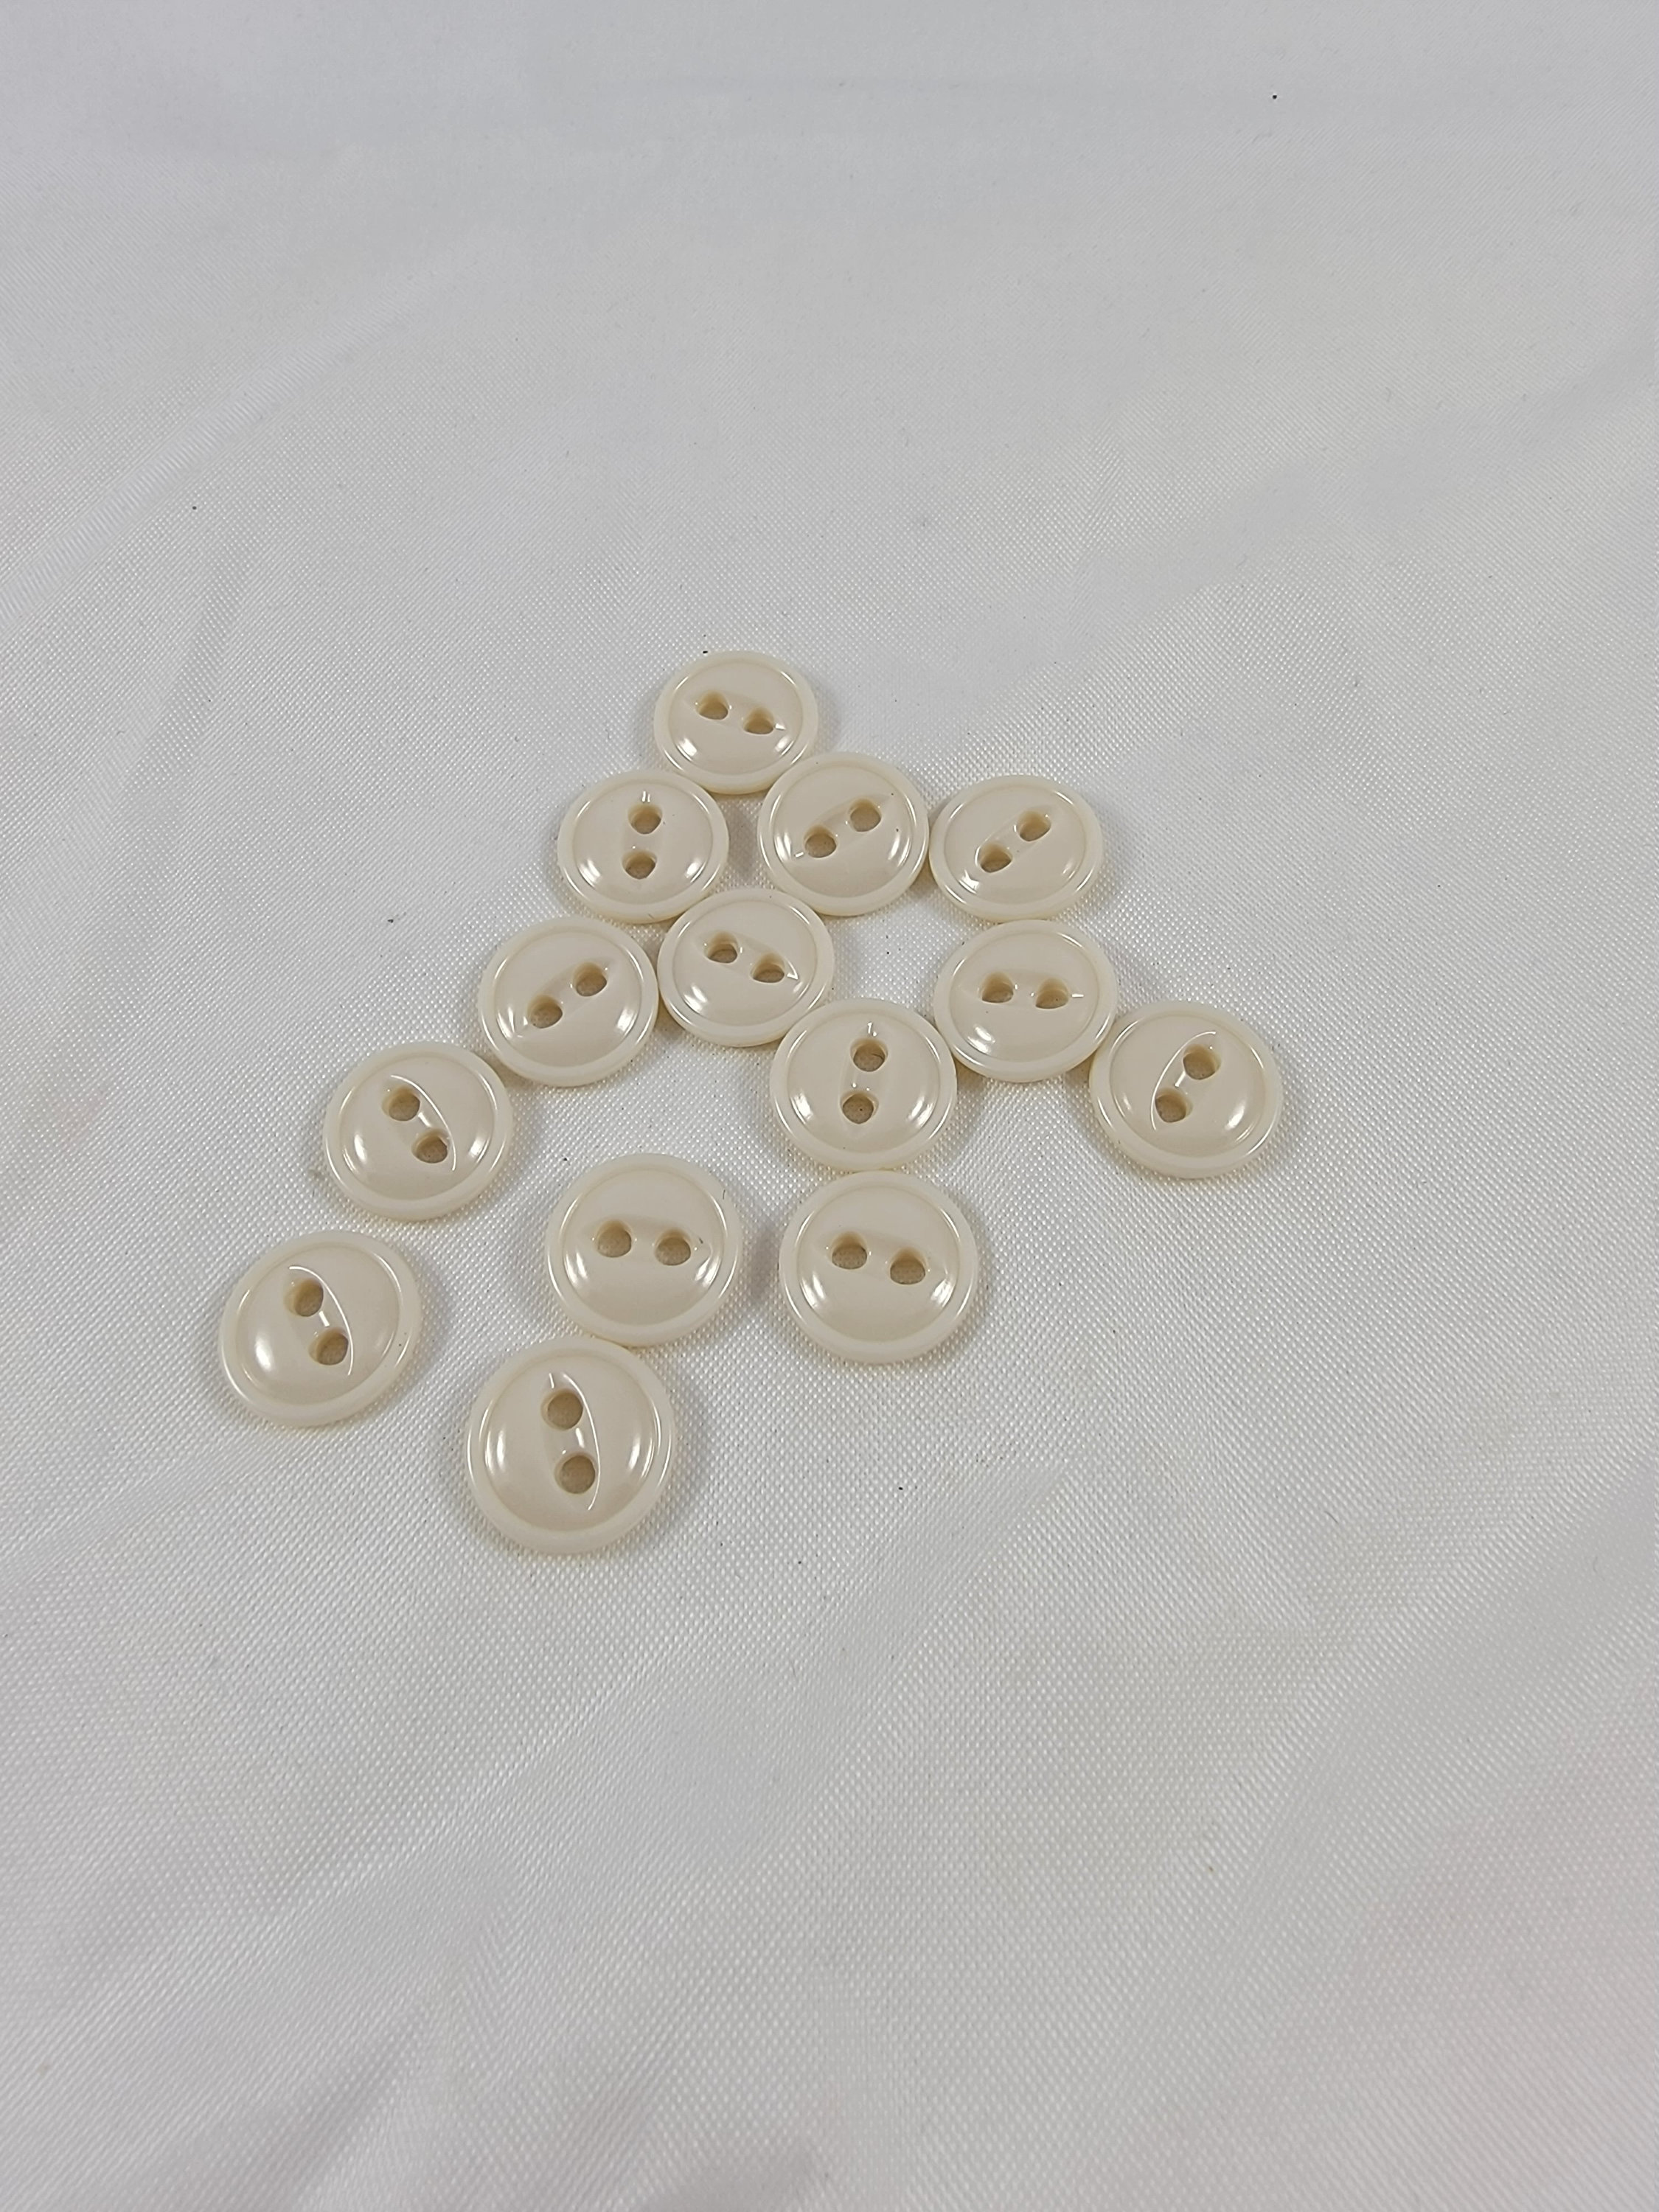 Details about   LARGE Vintage Off-White Celluloid Geometric Square Buttons Set of 5 S2 